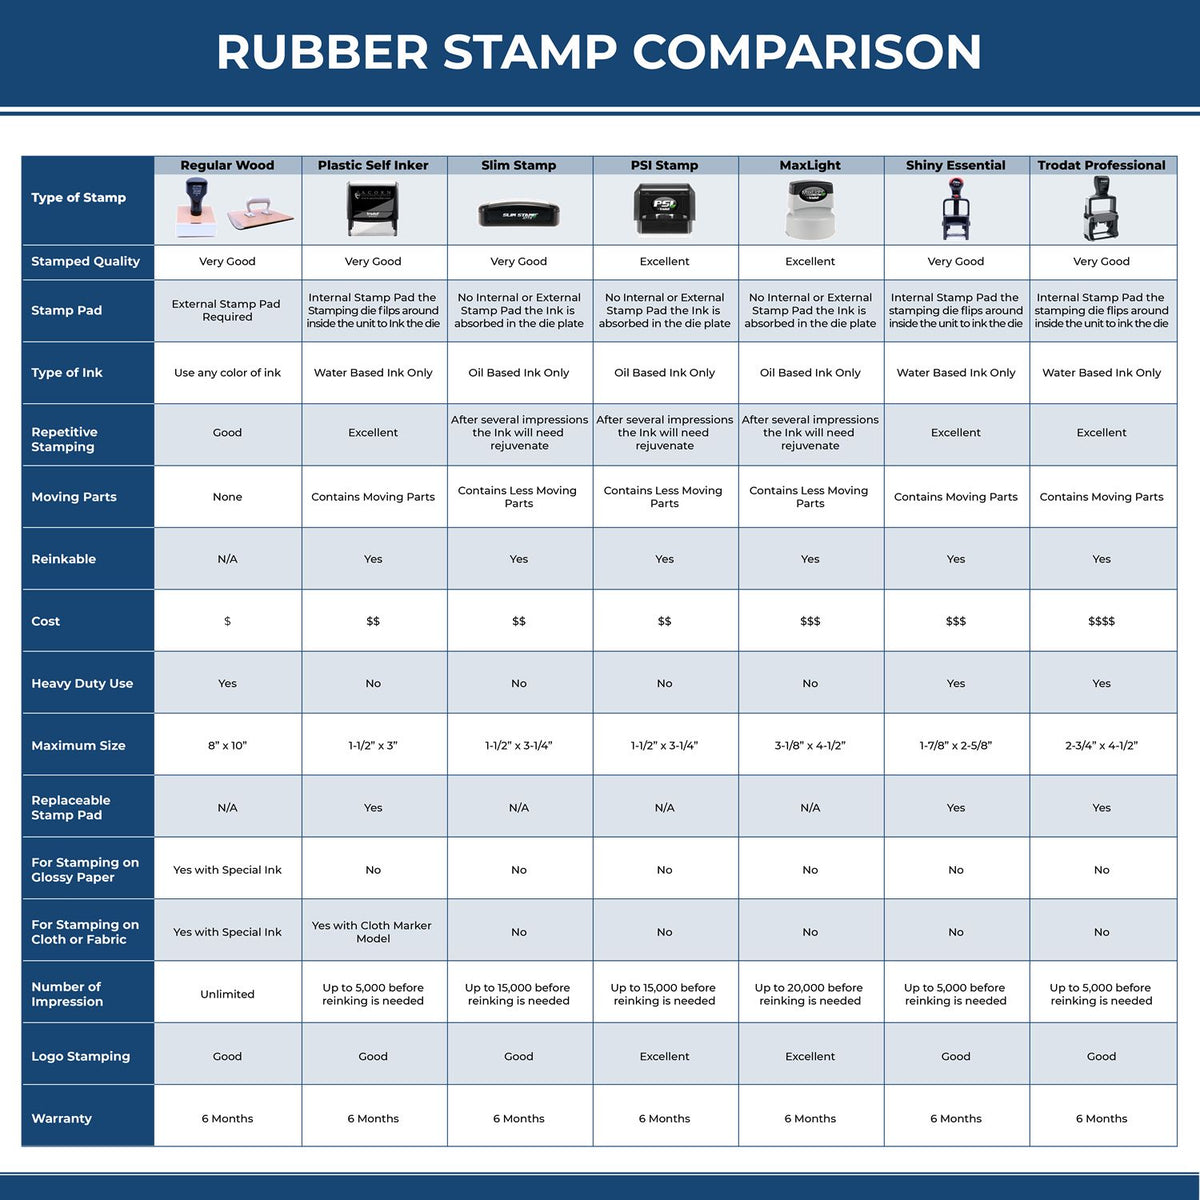 A comparison chart for the different types of mount models available for the PSI Washington Notary Stamp.